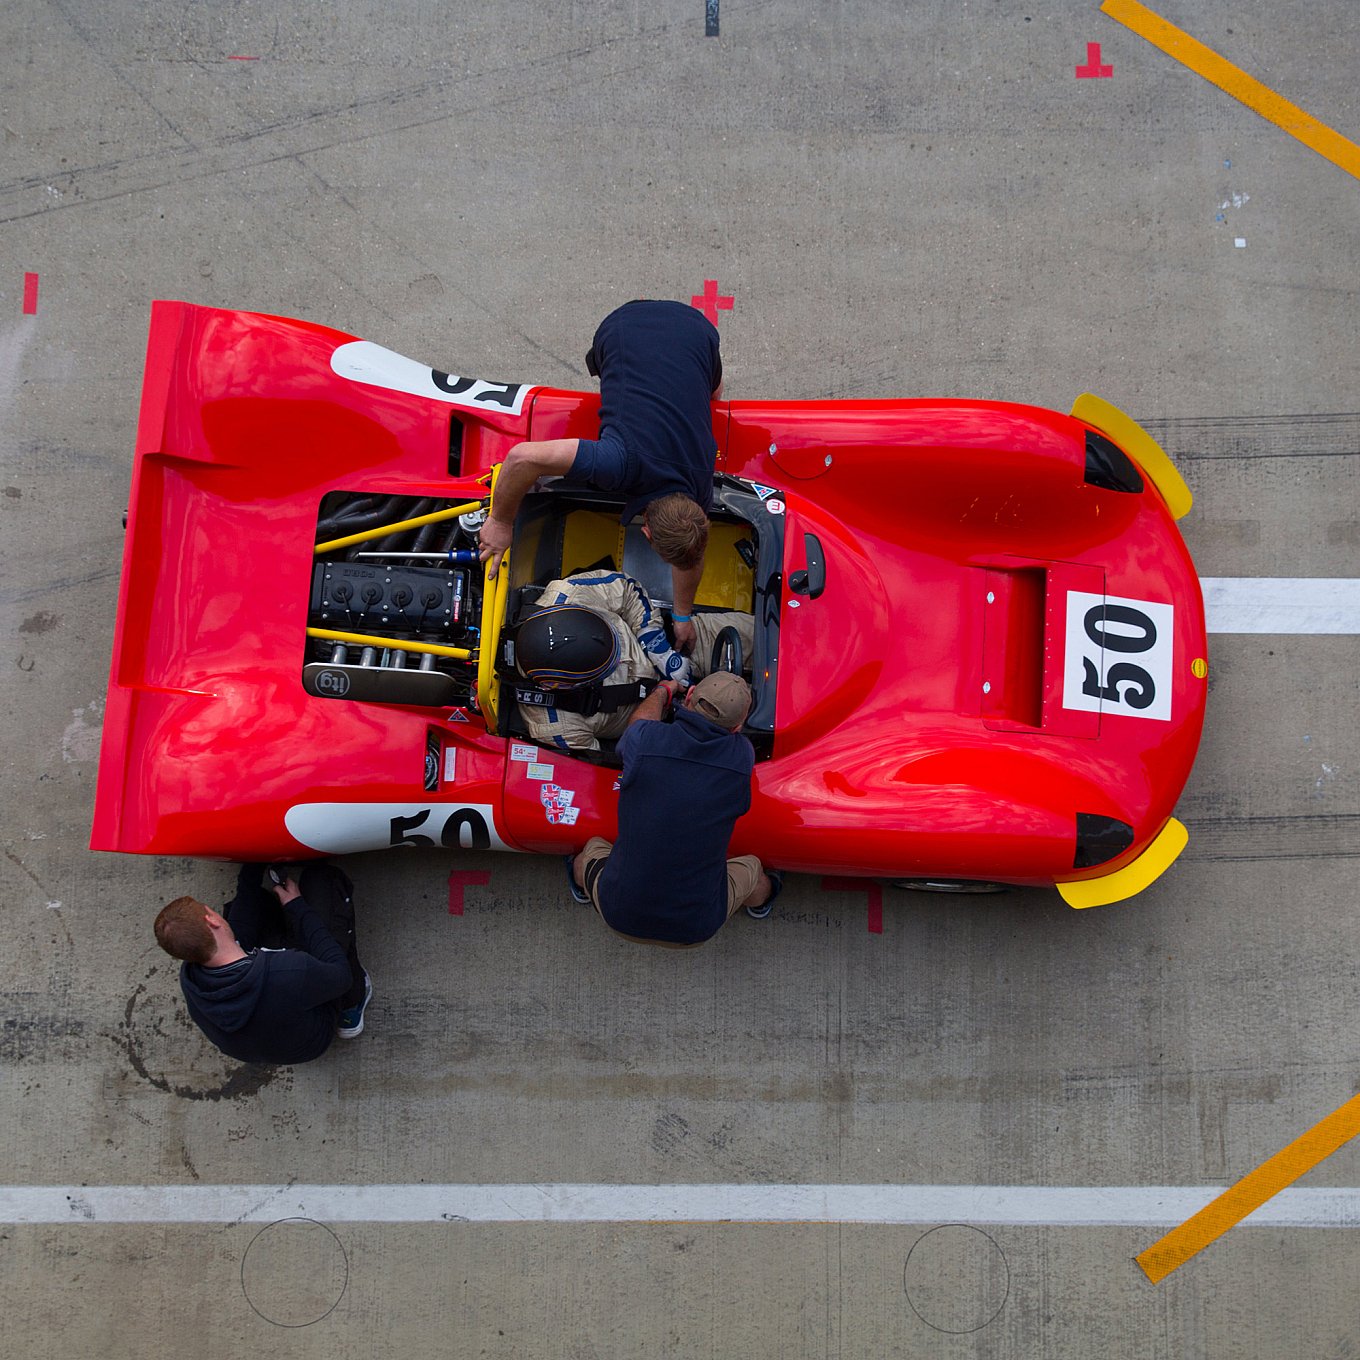 silverstone-classic-racing-cars-from-above-3